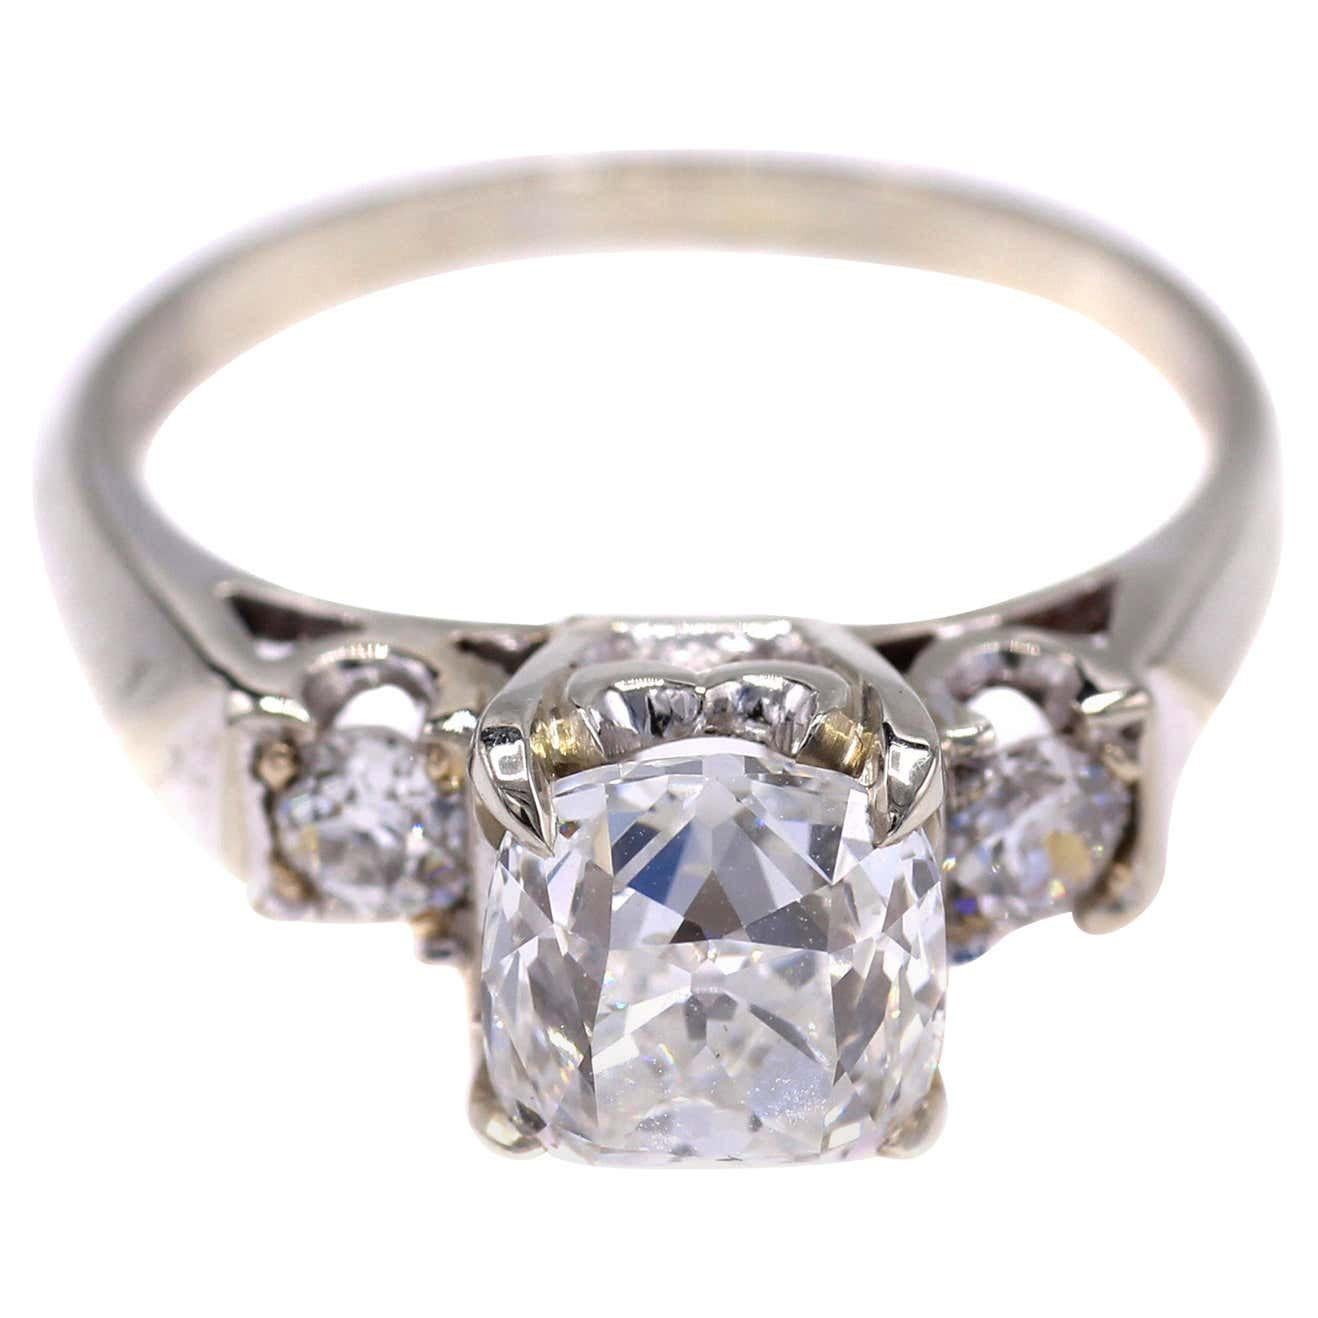 2.15 Carat Old Mine Brilliant GIA Certified Gold Diamond Ring For Sale 1